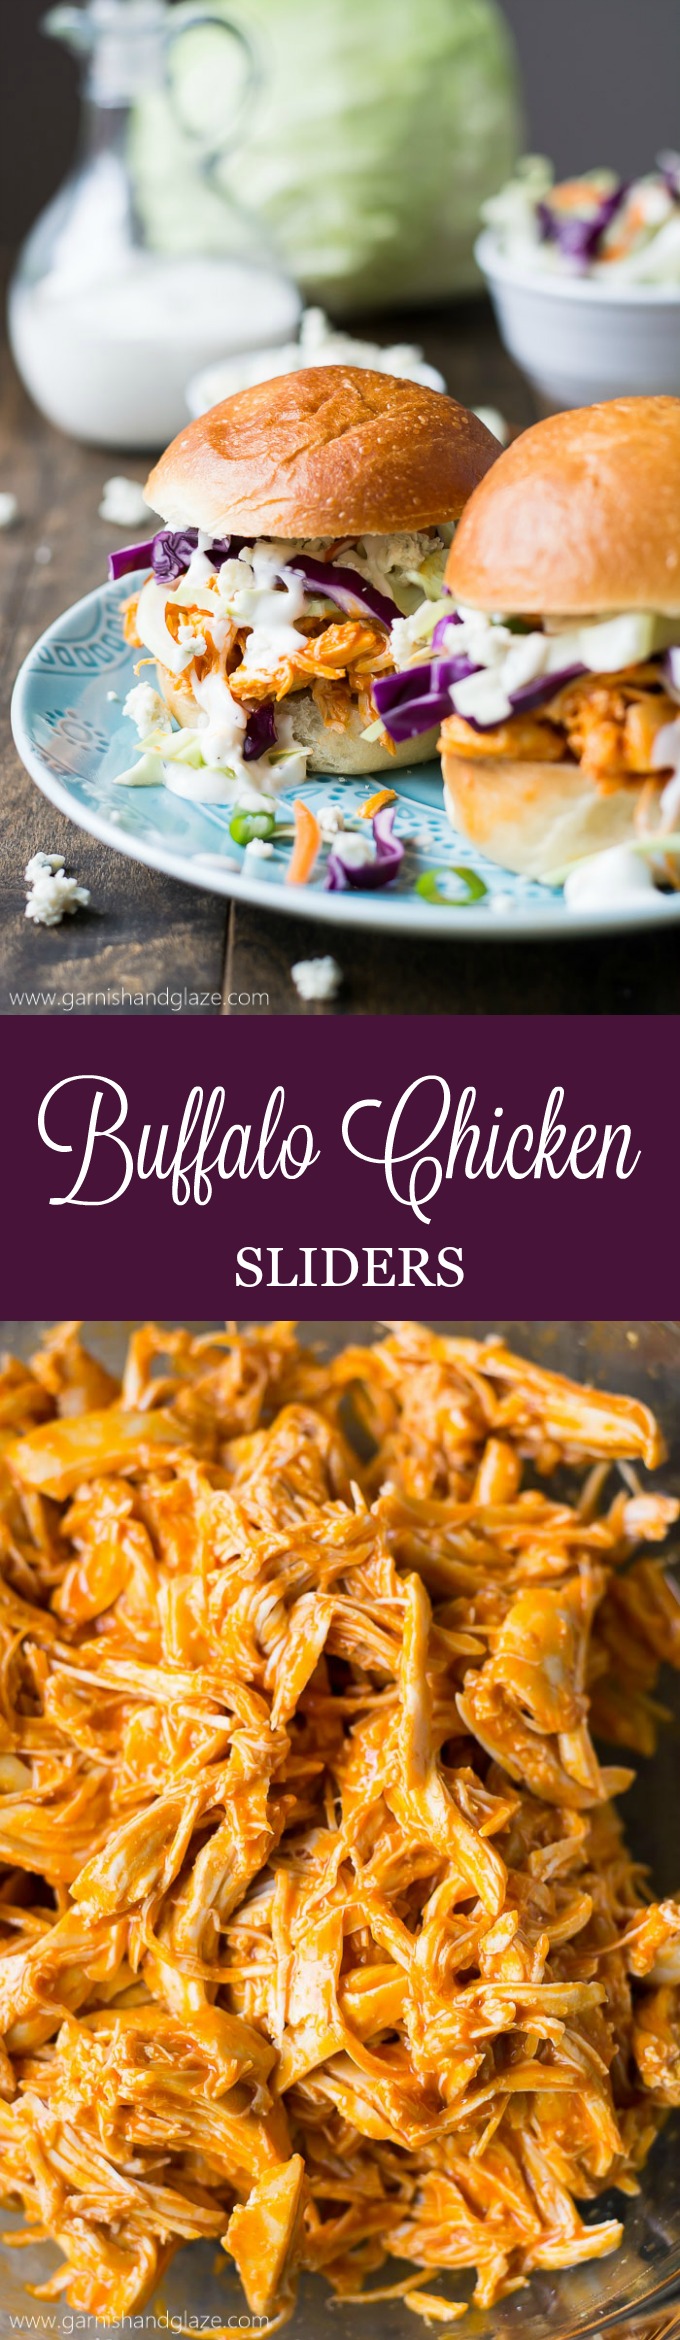 Slow-cooker Buffalo Chicken Sliders are filled with spicy tender chicken and refreshing crisp coleslaw.